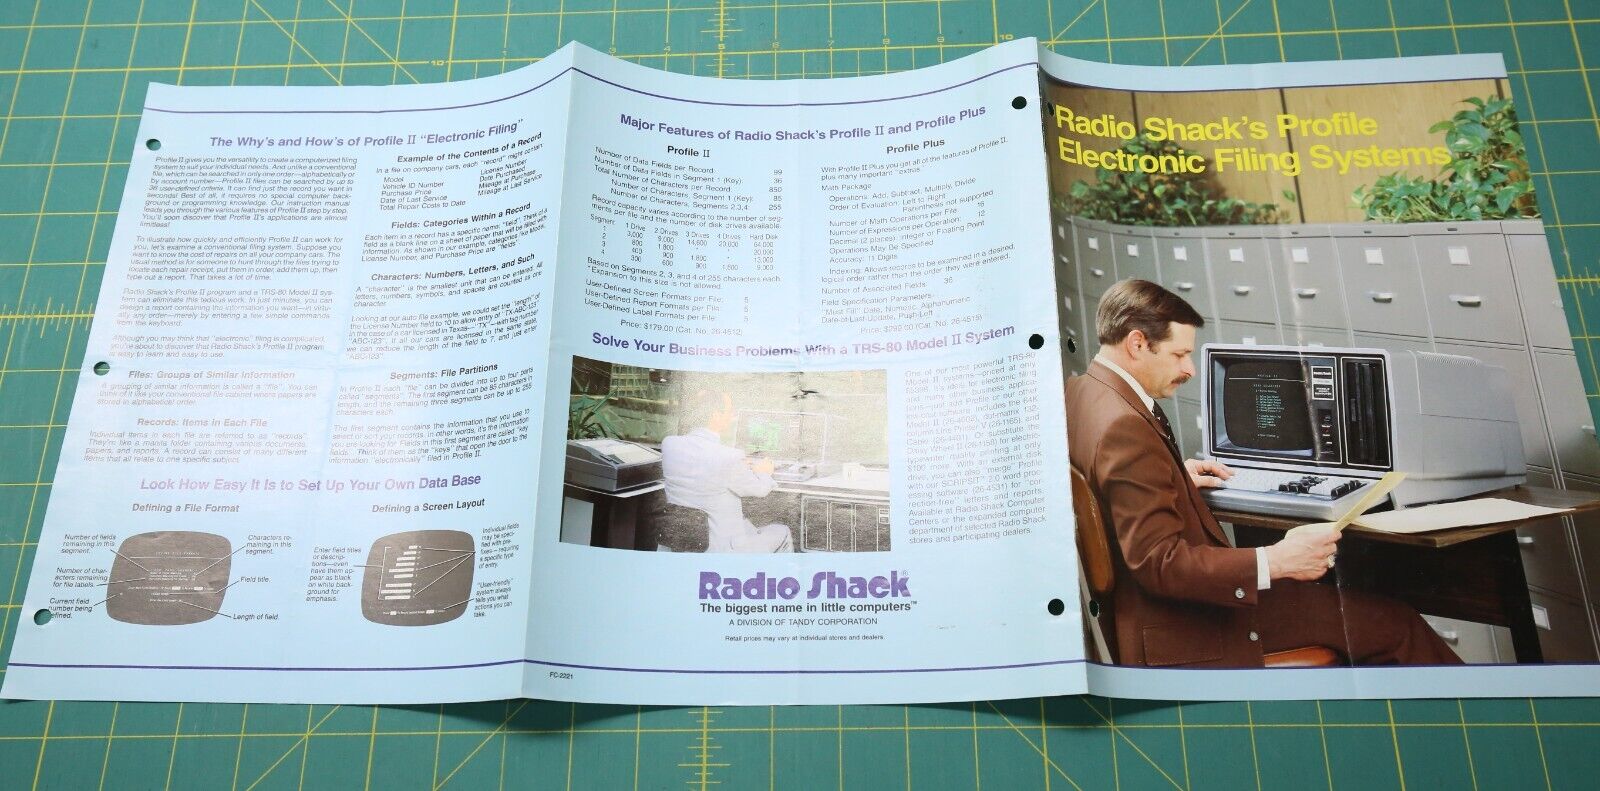 Radio Shack's Profile Electronic Filing Systems Brochure